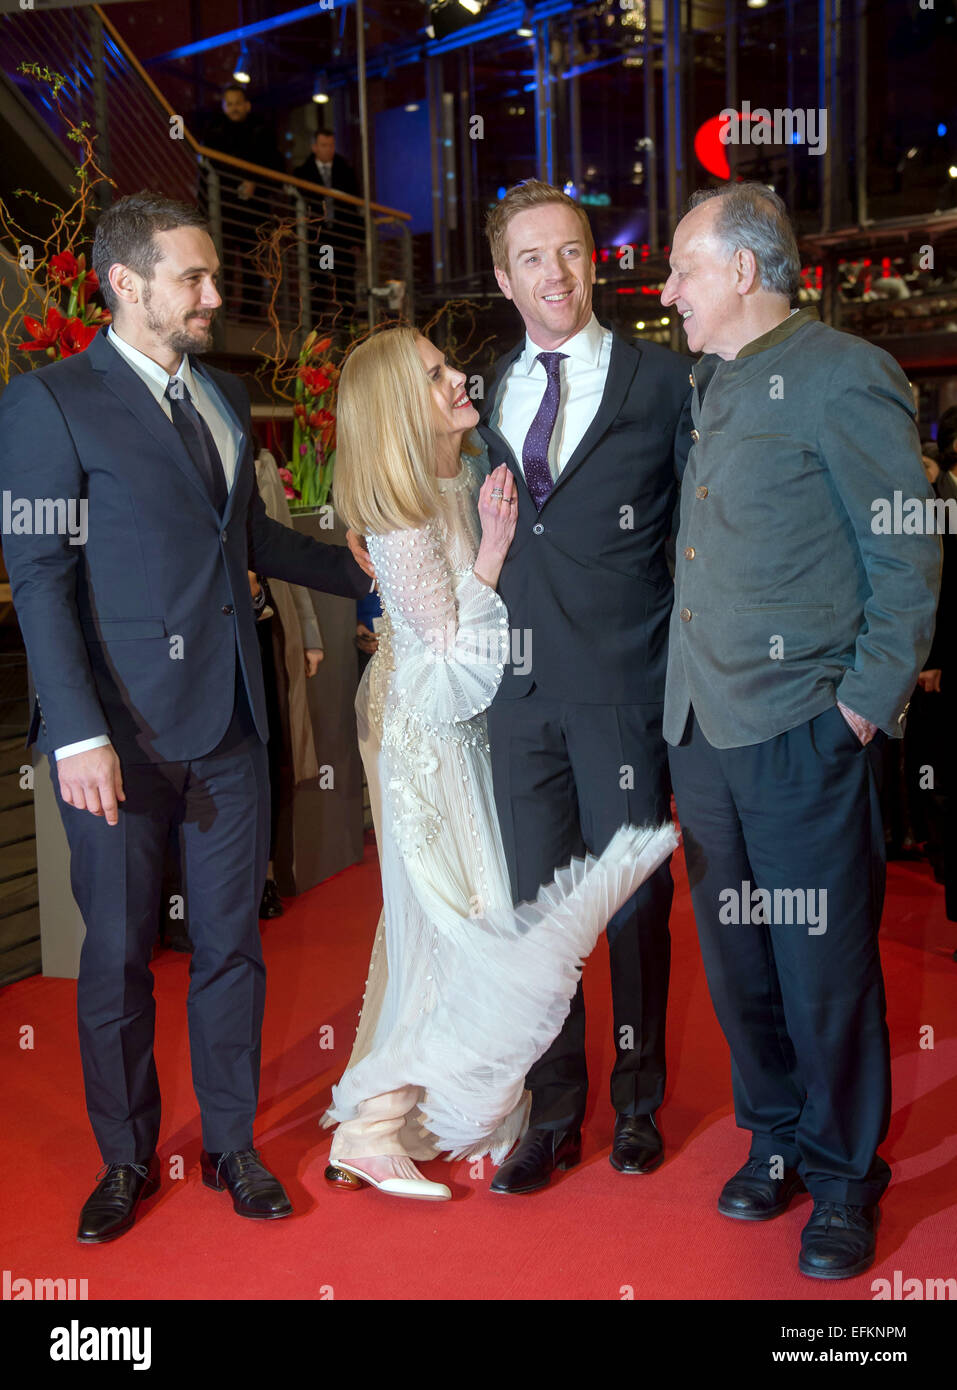 Berlin, Germany. 06th Feb, 2015. US-actor James Franco (L-R), Australian actress Nicole Kidman, British actor Damian Lewis and German director Werner Herzog arrive for the screening of 'Queen of the Desert' during the 65th annual Berlin Film Festival, in Berlin, Germany, 06 February 2015. The movie is presented in the Official Competition of the Berlinale, which runs from 05 to 15 February 2015. PHOTO: TIM BRAKEMEIER/dpa/Alamy Live News Stock Photo